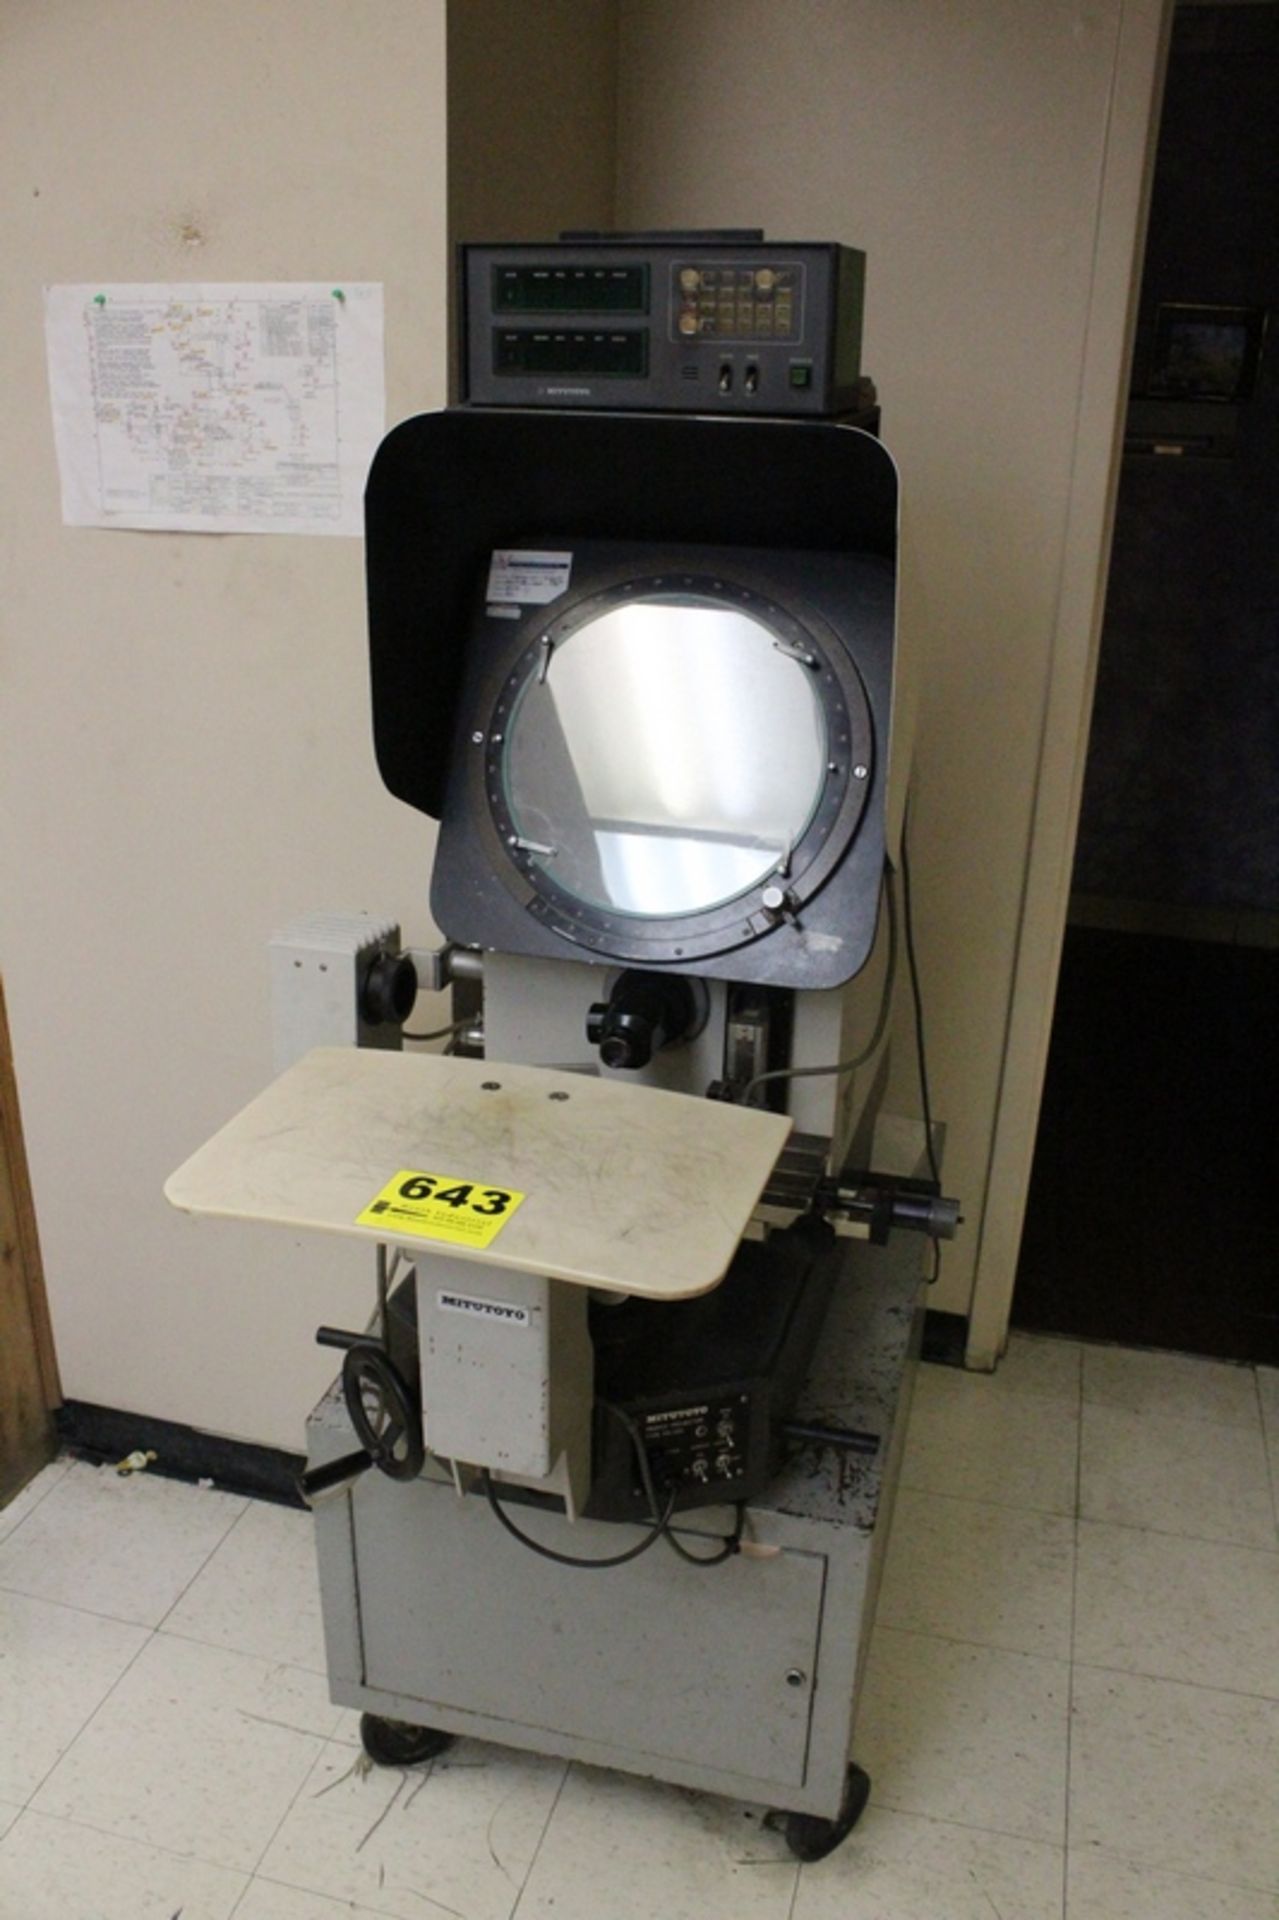 MITUTOYO 13” TYPE PH-350 OPTICAL COMPARATOR, S/N 10664, WITH MITUTOYO 2-AXIS DIGITAL READOUT,